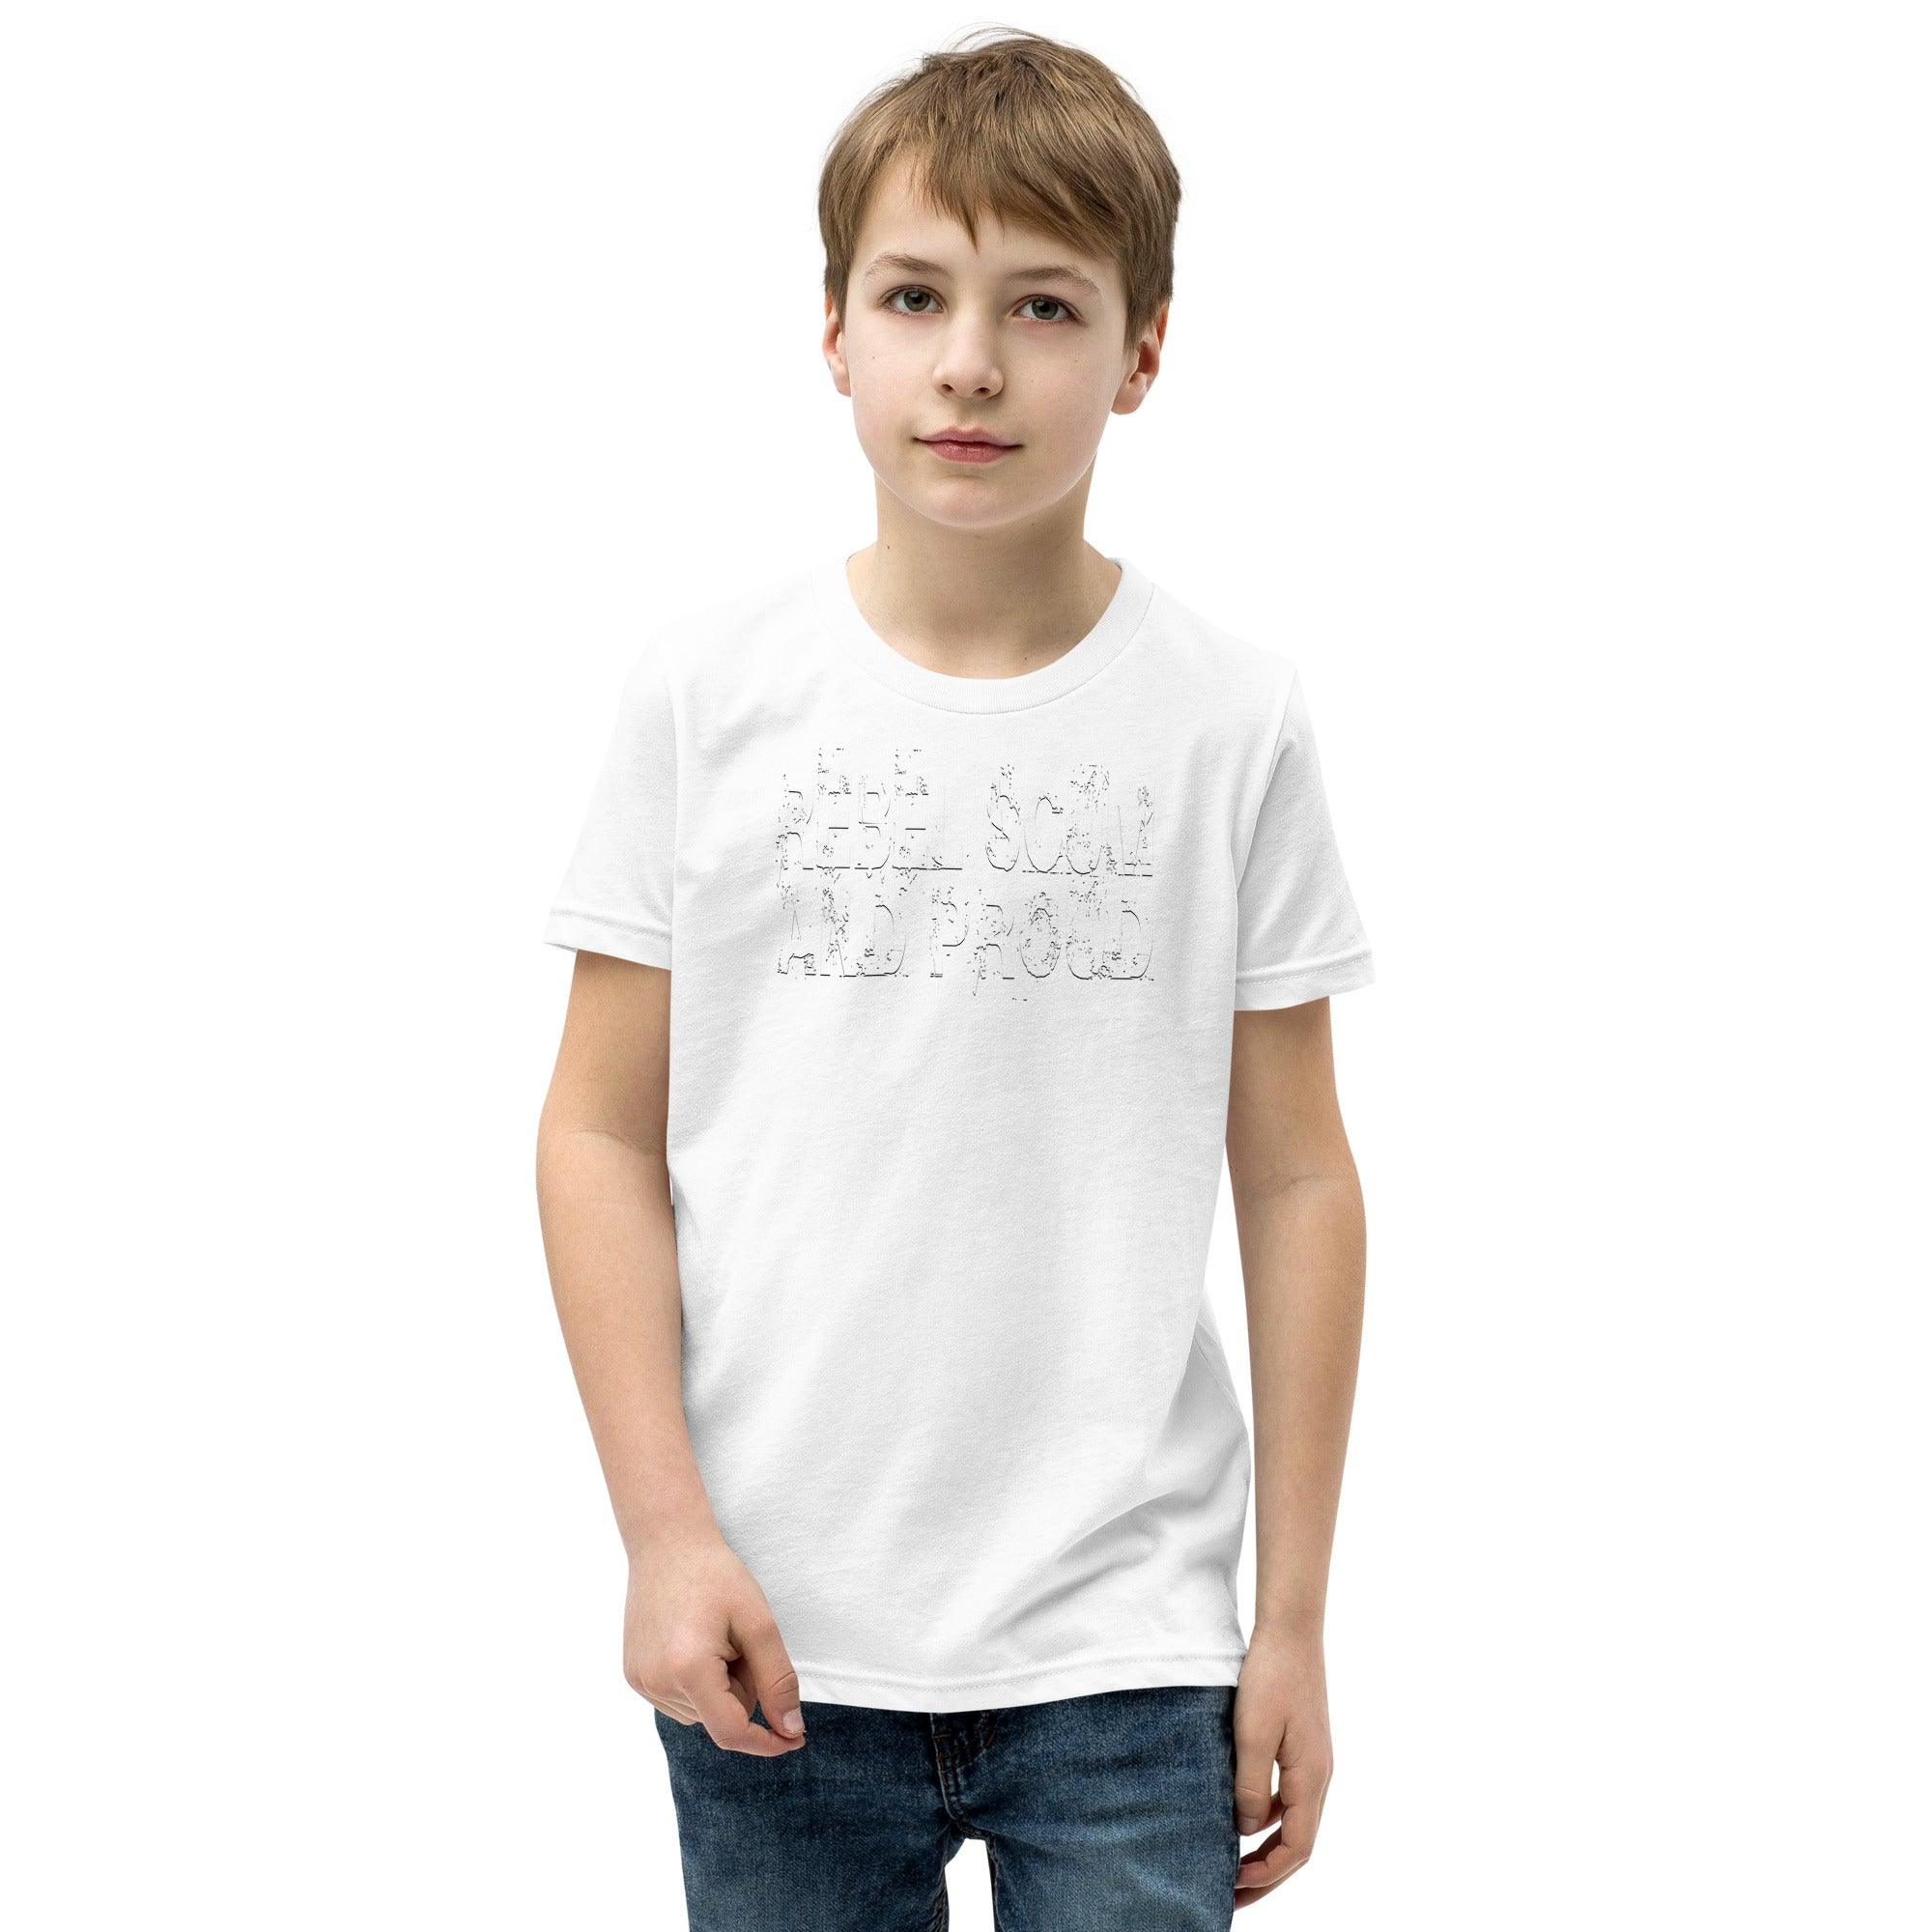 Rebel Scum and Proud Youth Short Sleeve T-Shirt